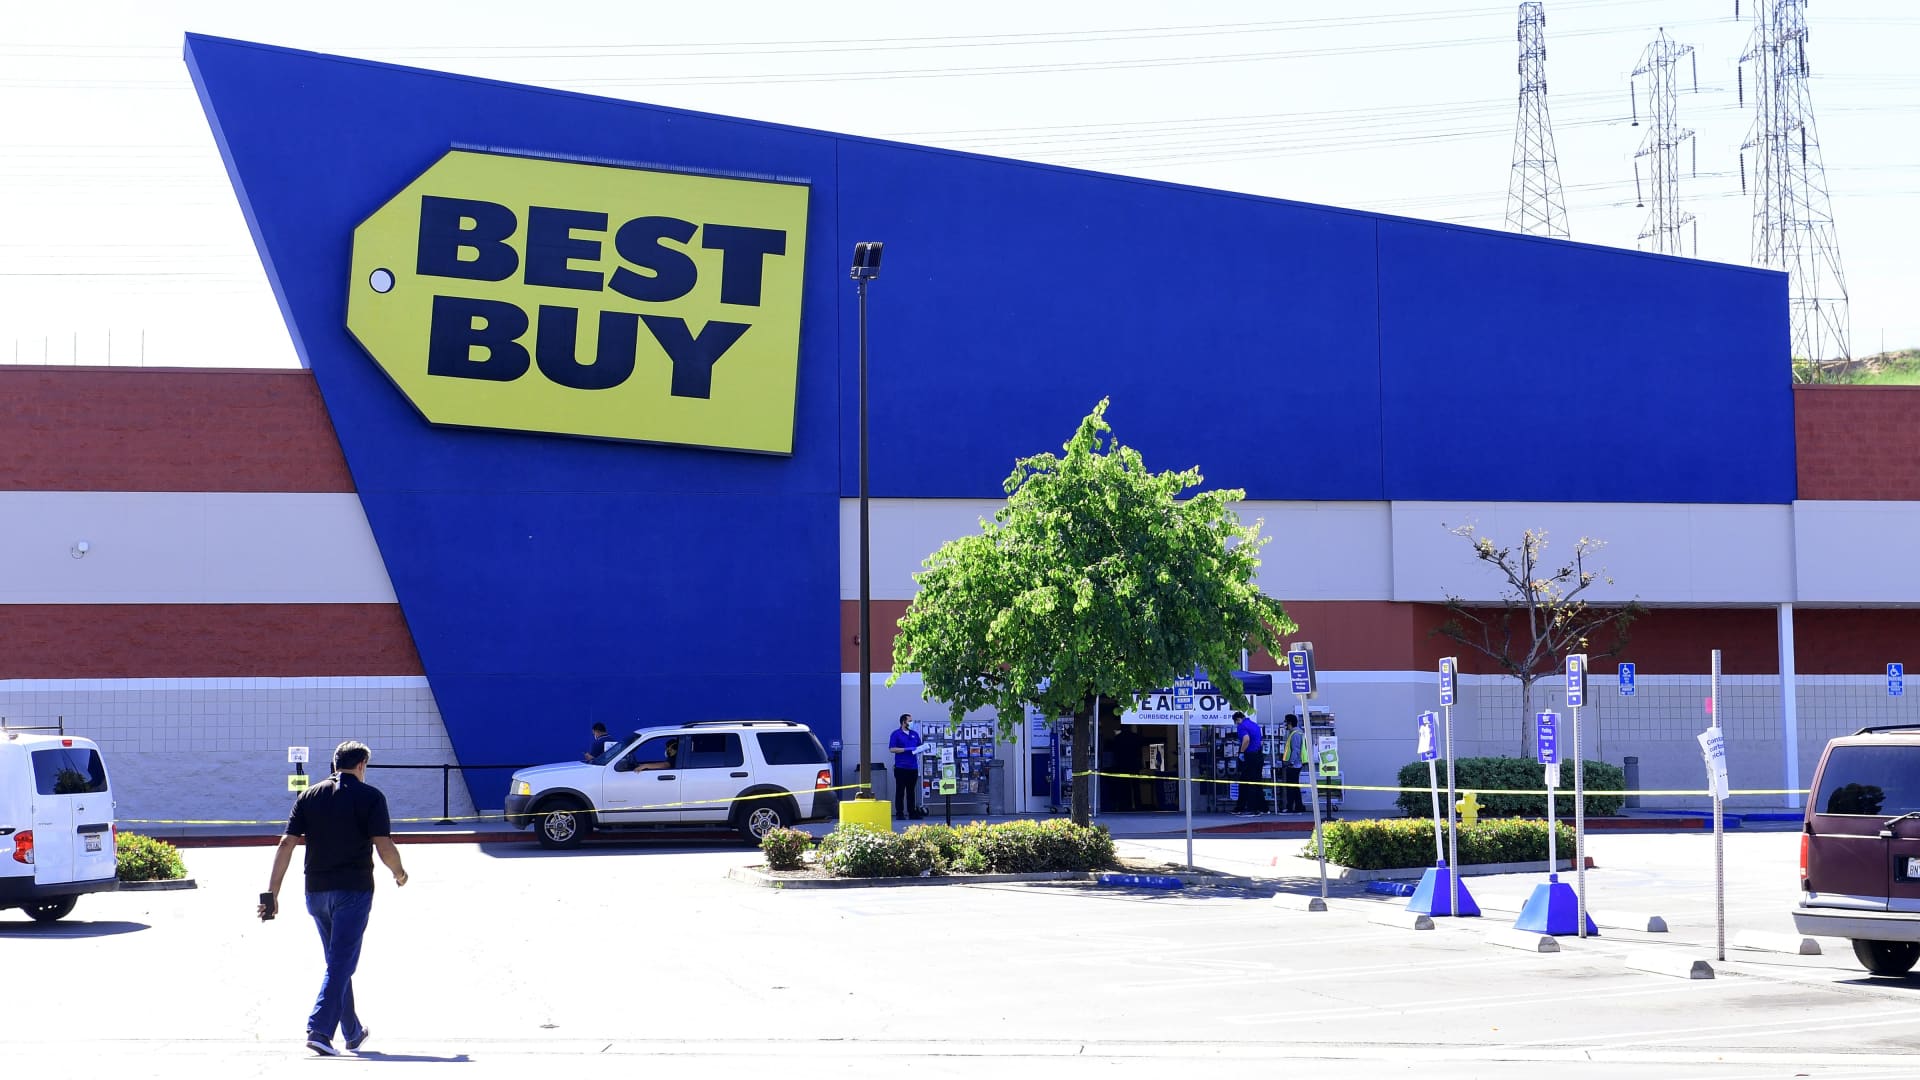 A near empty parking lot in front of a Best Buy store in Montebello, California on April 15, 2020 as the electronics nationwide chain store remains closed to customers but open for pickups.